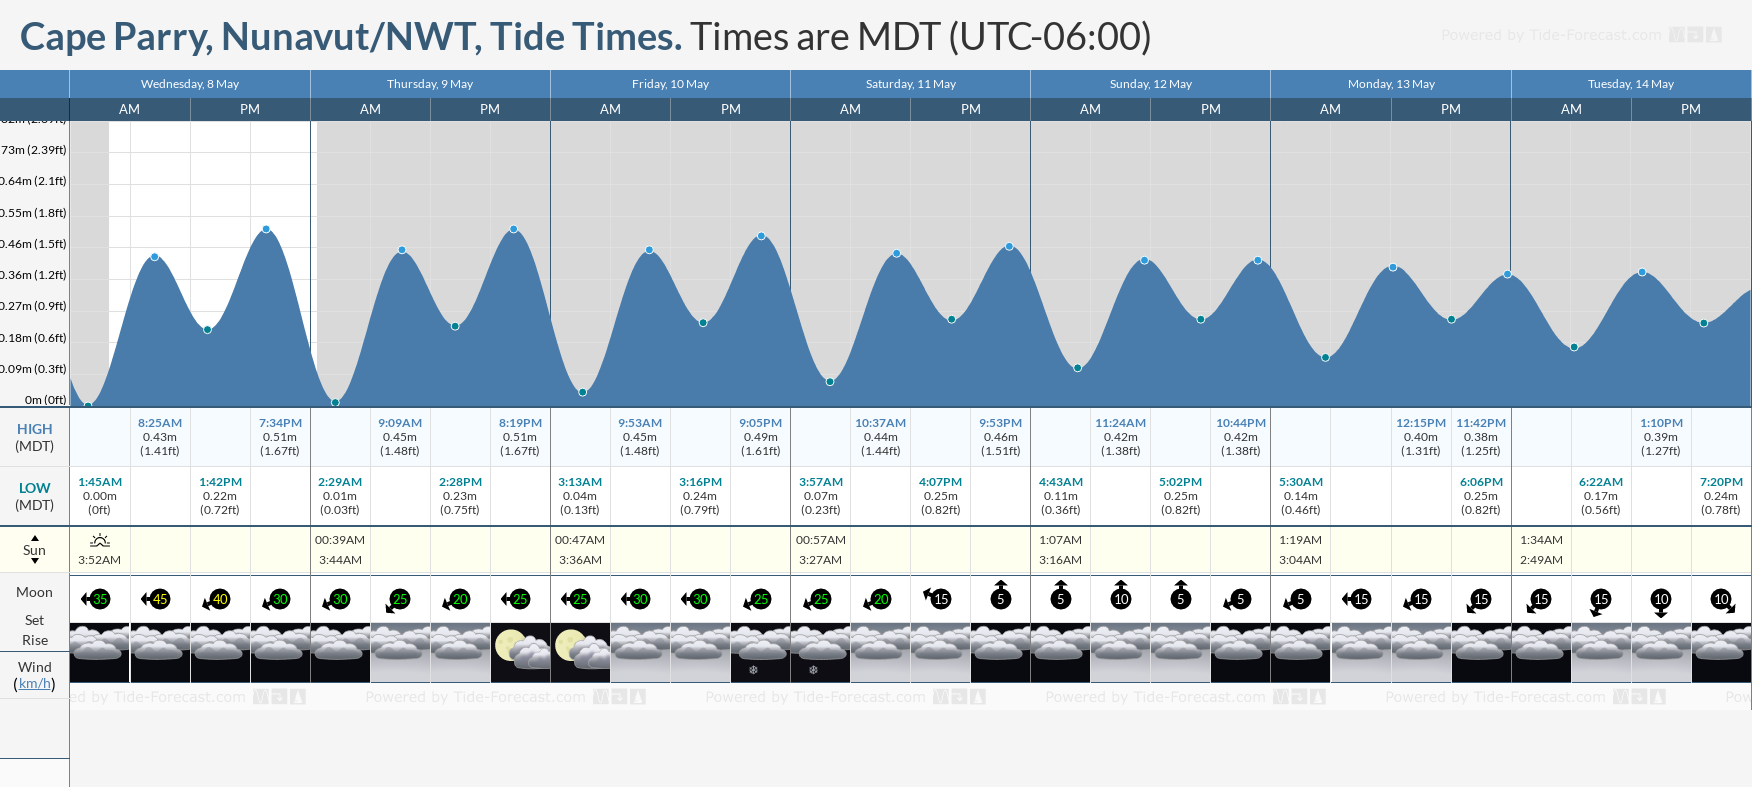 Cape Parry, Nunavut/NWT Tide Chart including high and low tide tide times for the next 7 days